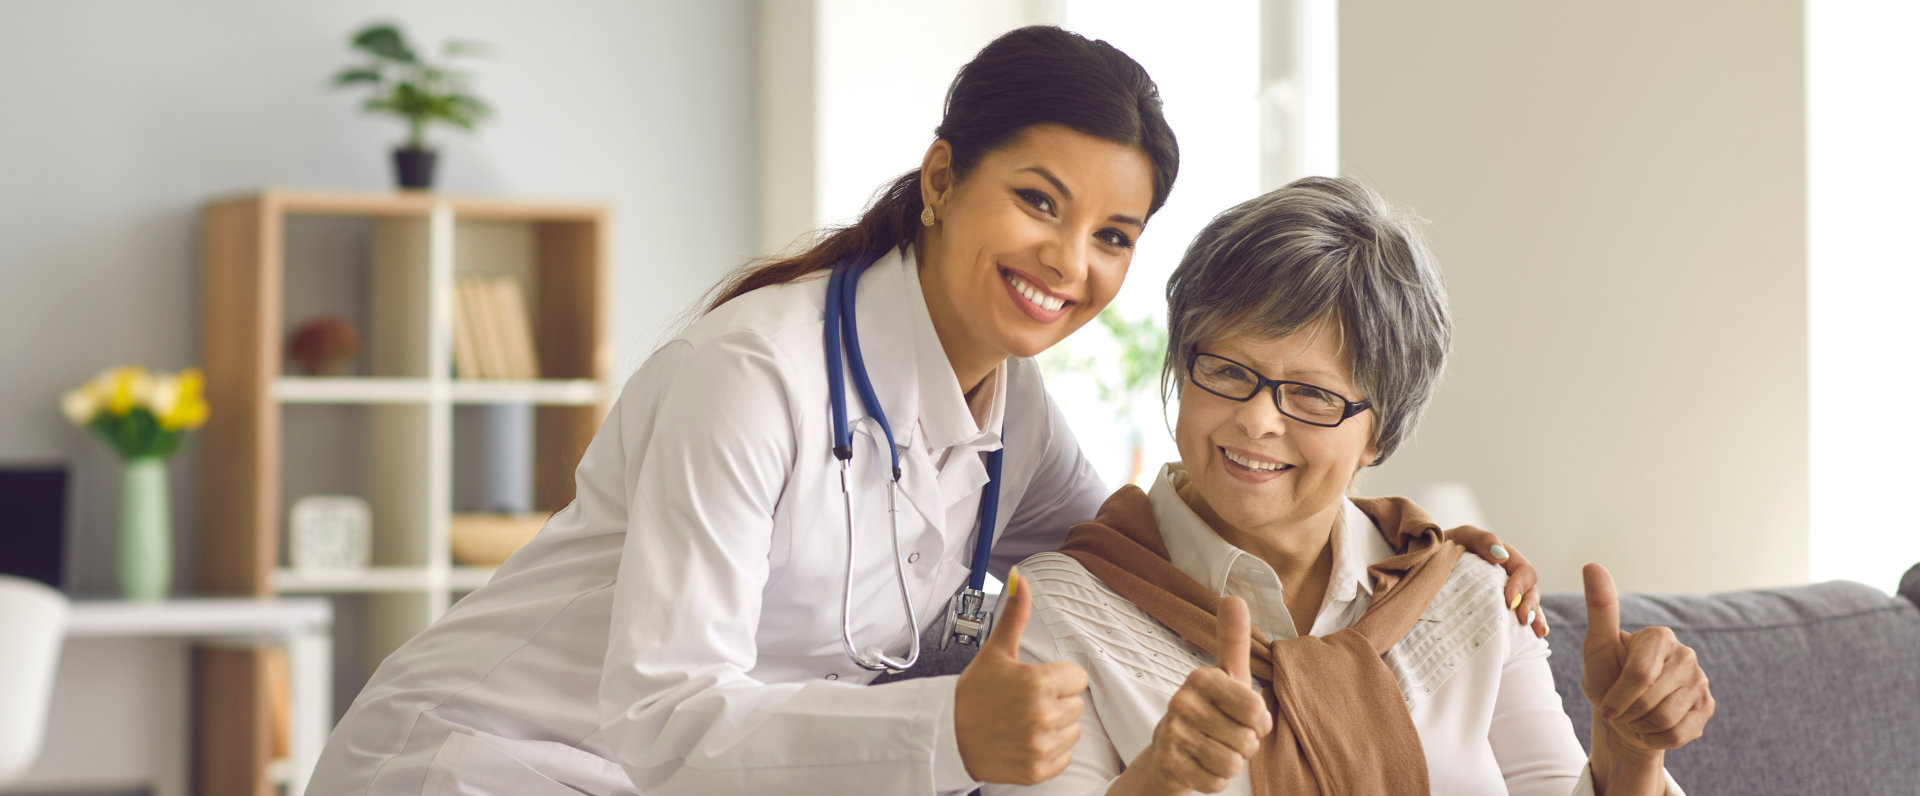 image of a patient and doctor doing thumbs up